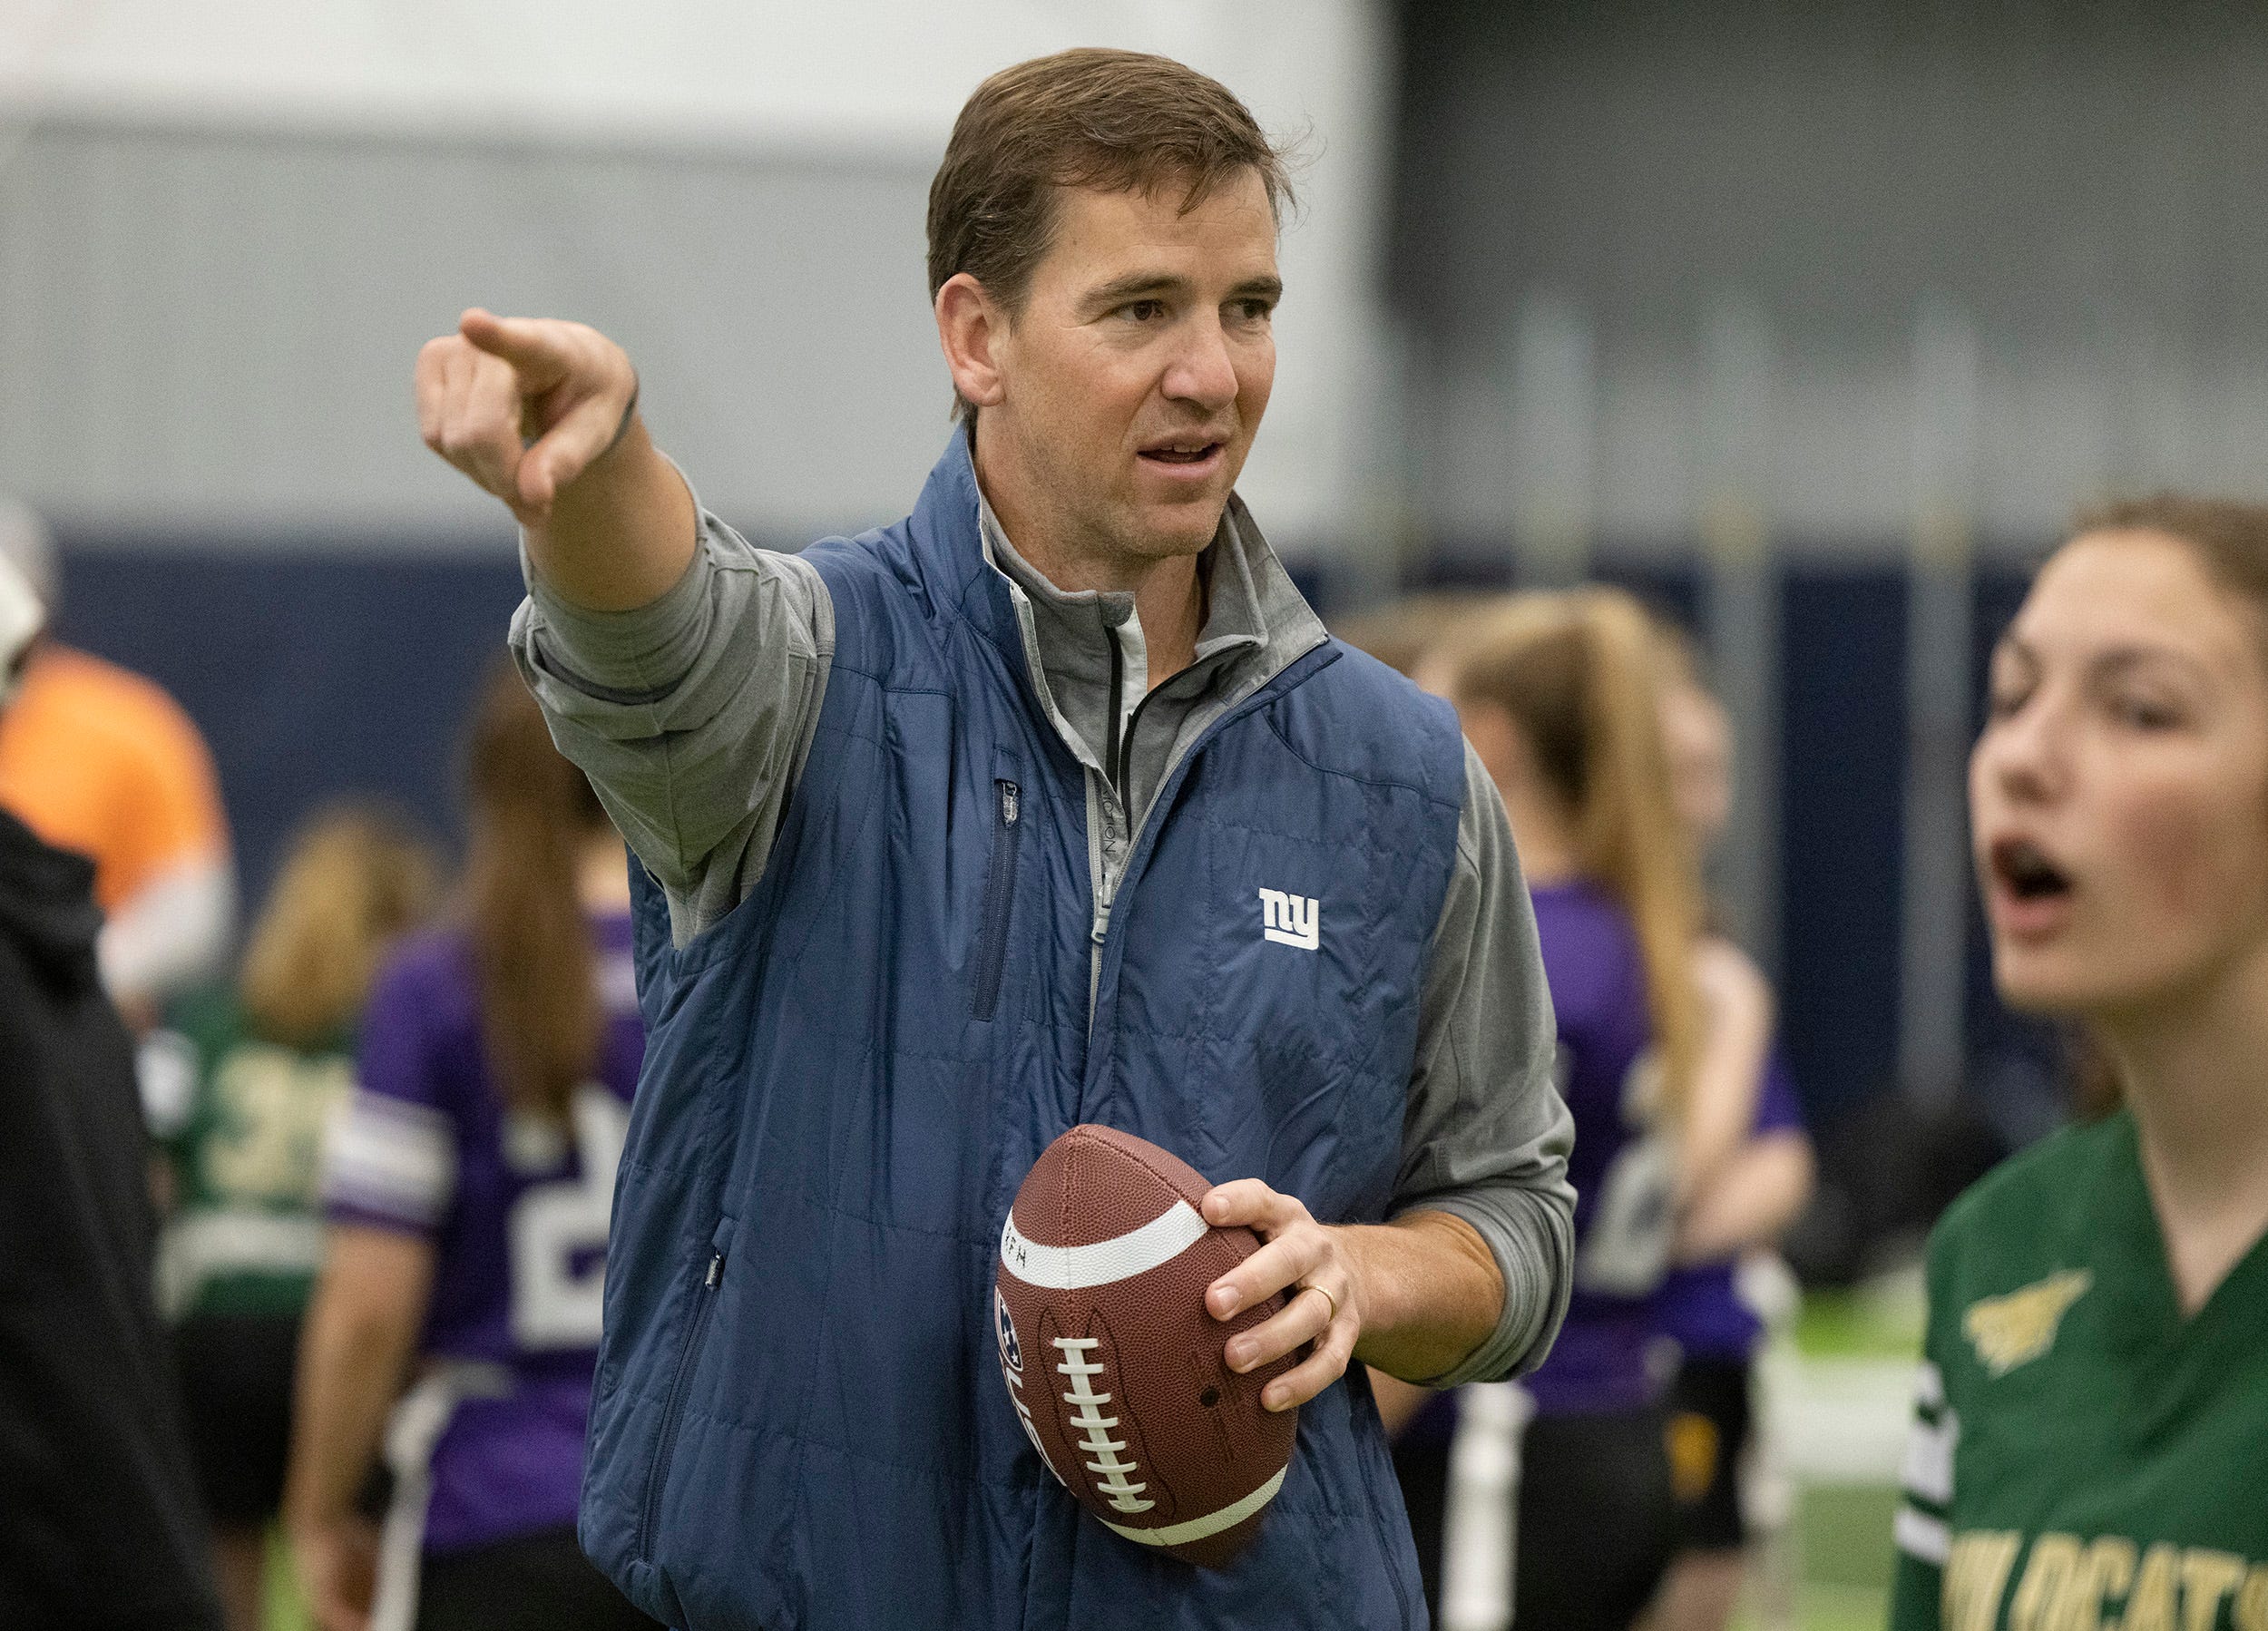 Eli Manning, Retired NY Giants NFL Quarterback, Joins Private Equity Firm -  Bloomberg